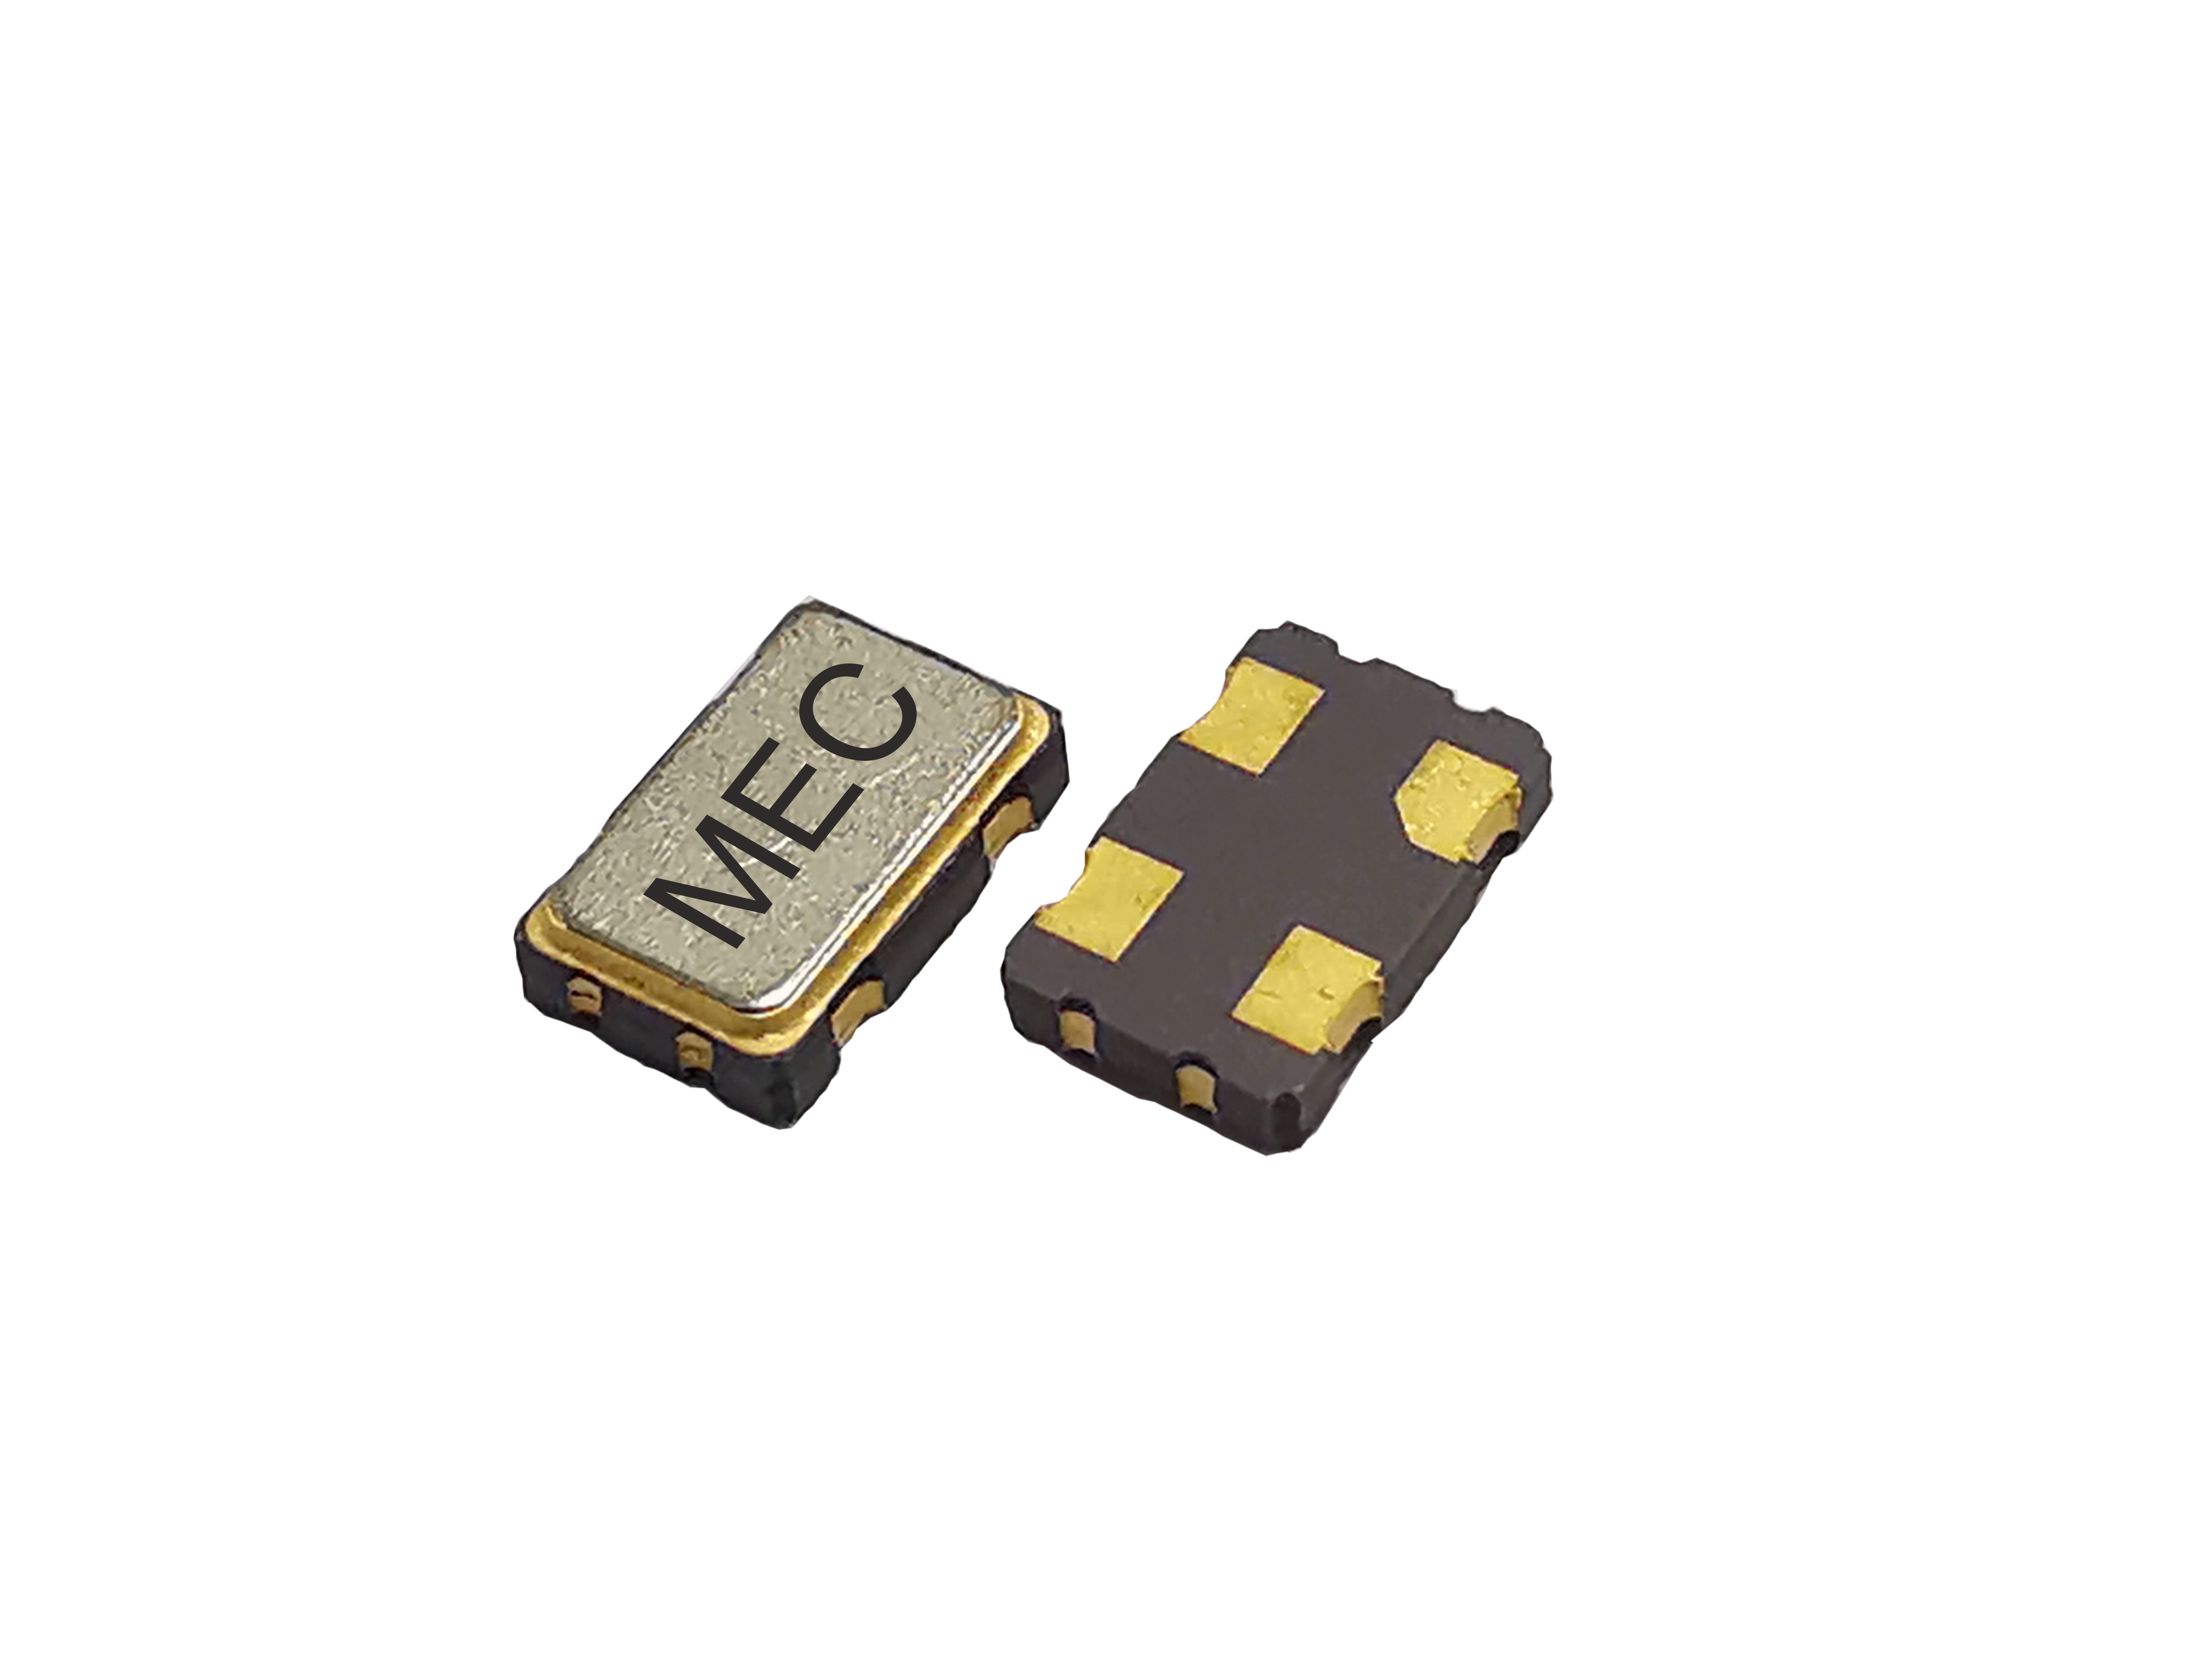 HY53 5032 1.8V Wide Operating Temperature -40℃ to +125℃ CMOS SMD Crystal Oscillator